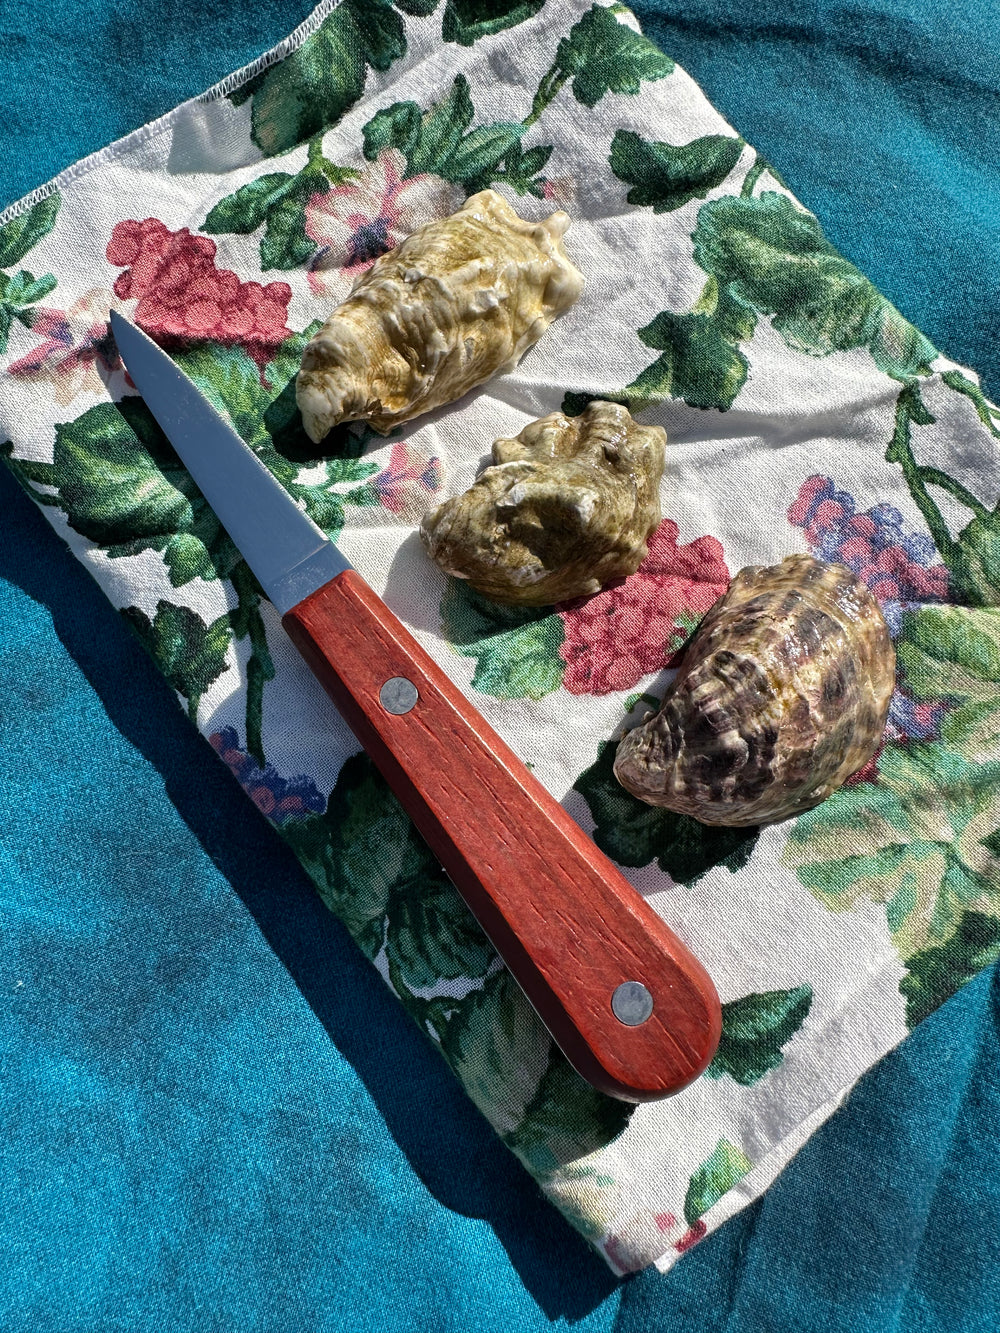 Wooden Oyster Shucking Knife